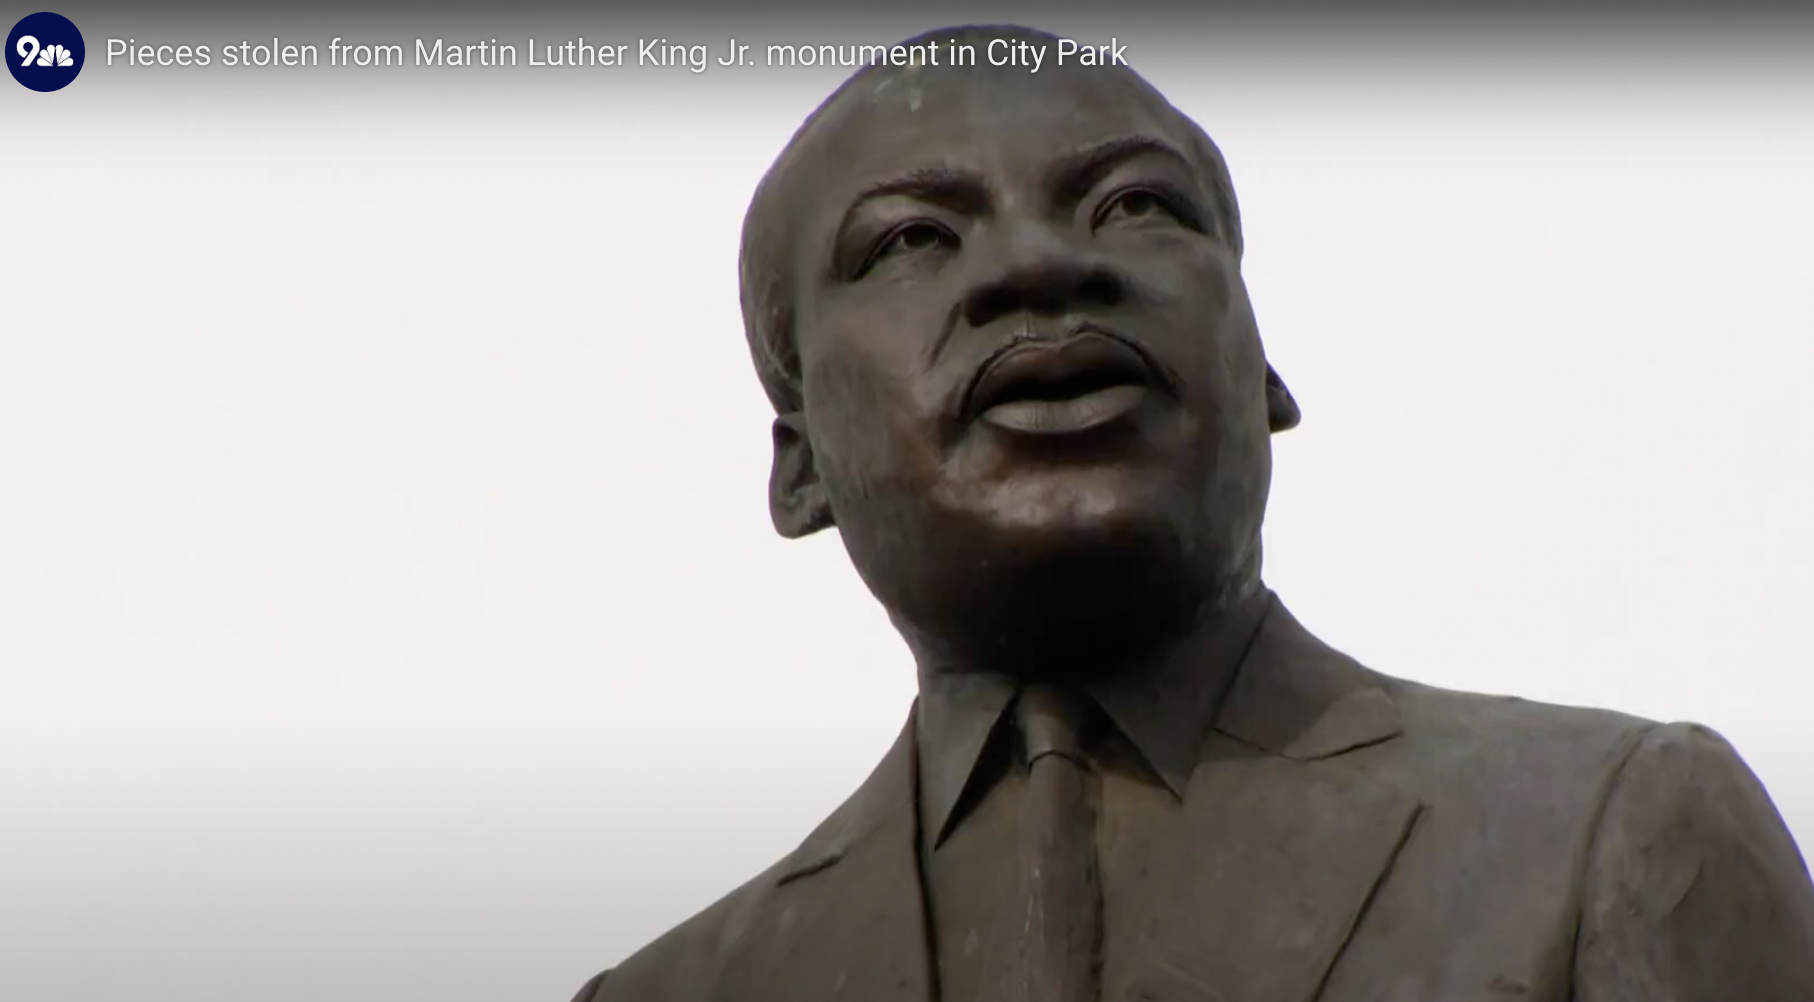 Parts of a Martin Luther King Jr. memorial in Denver have been stolen